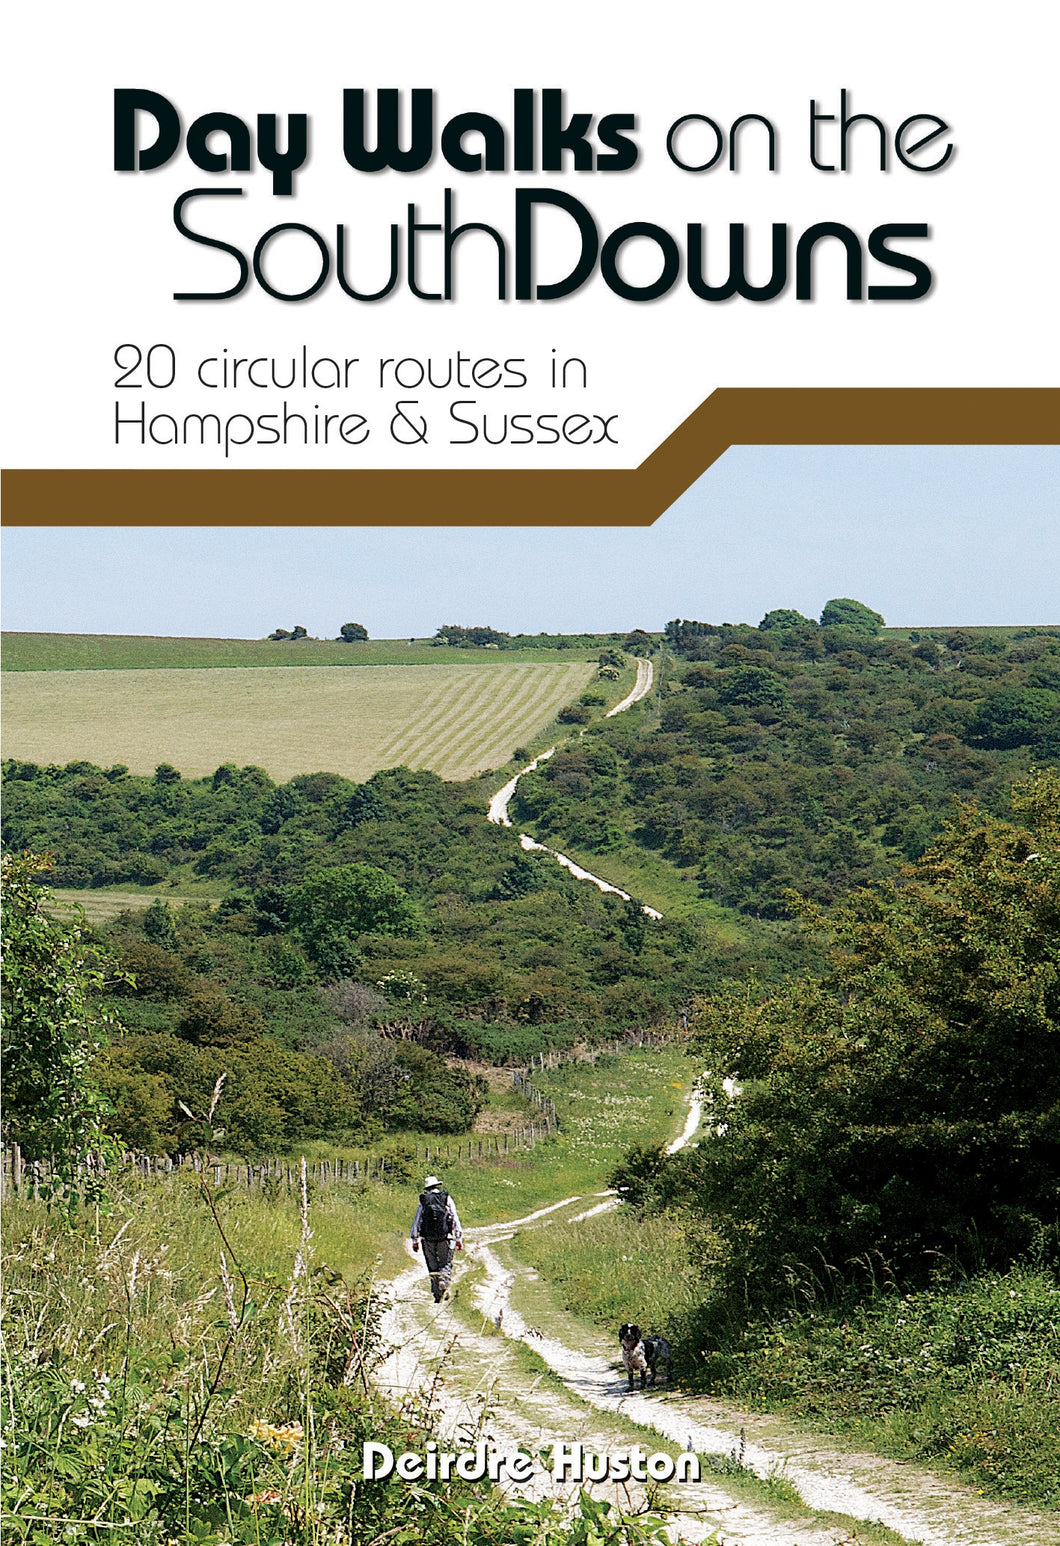 Day Walks on the South Downs